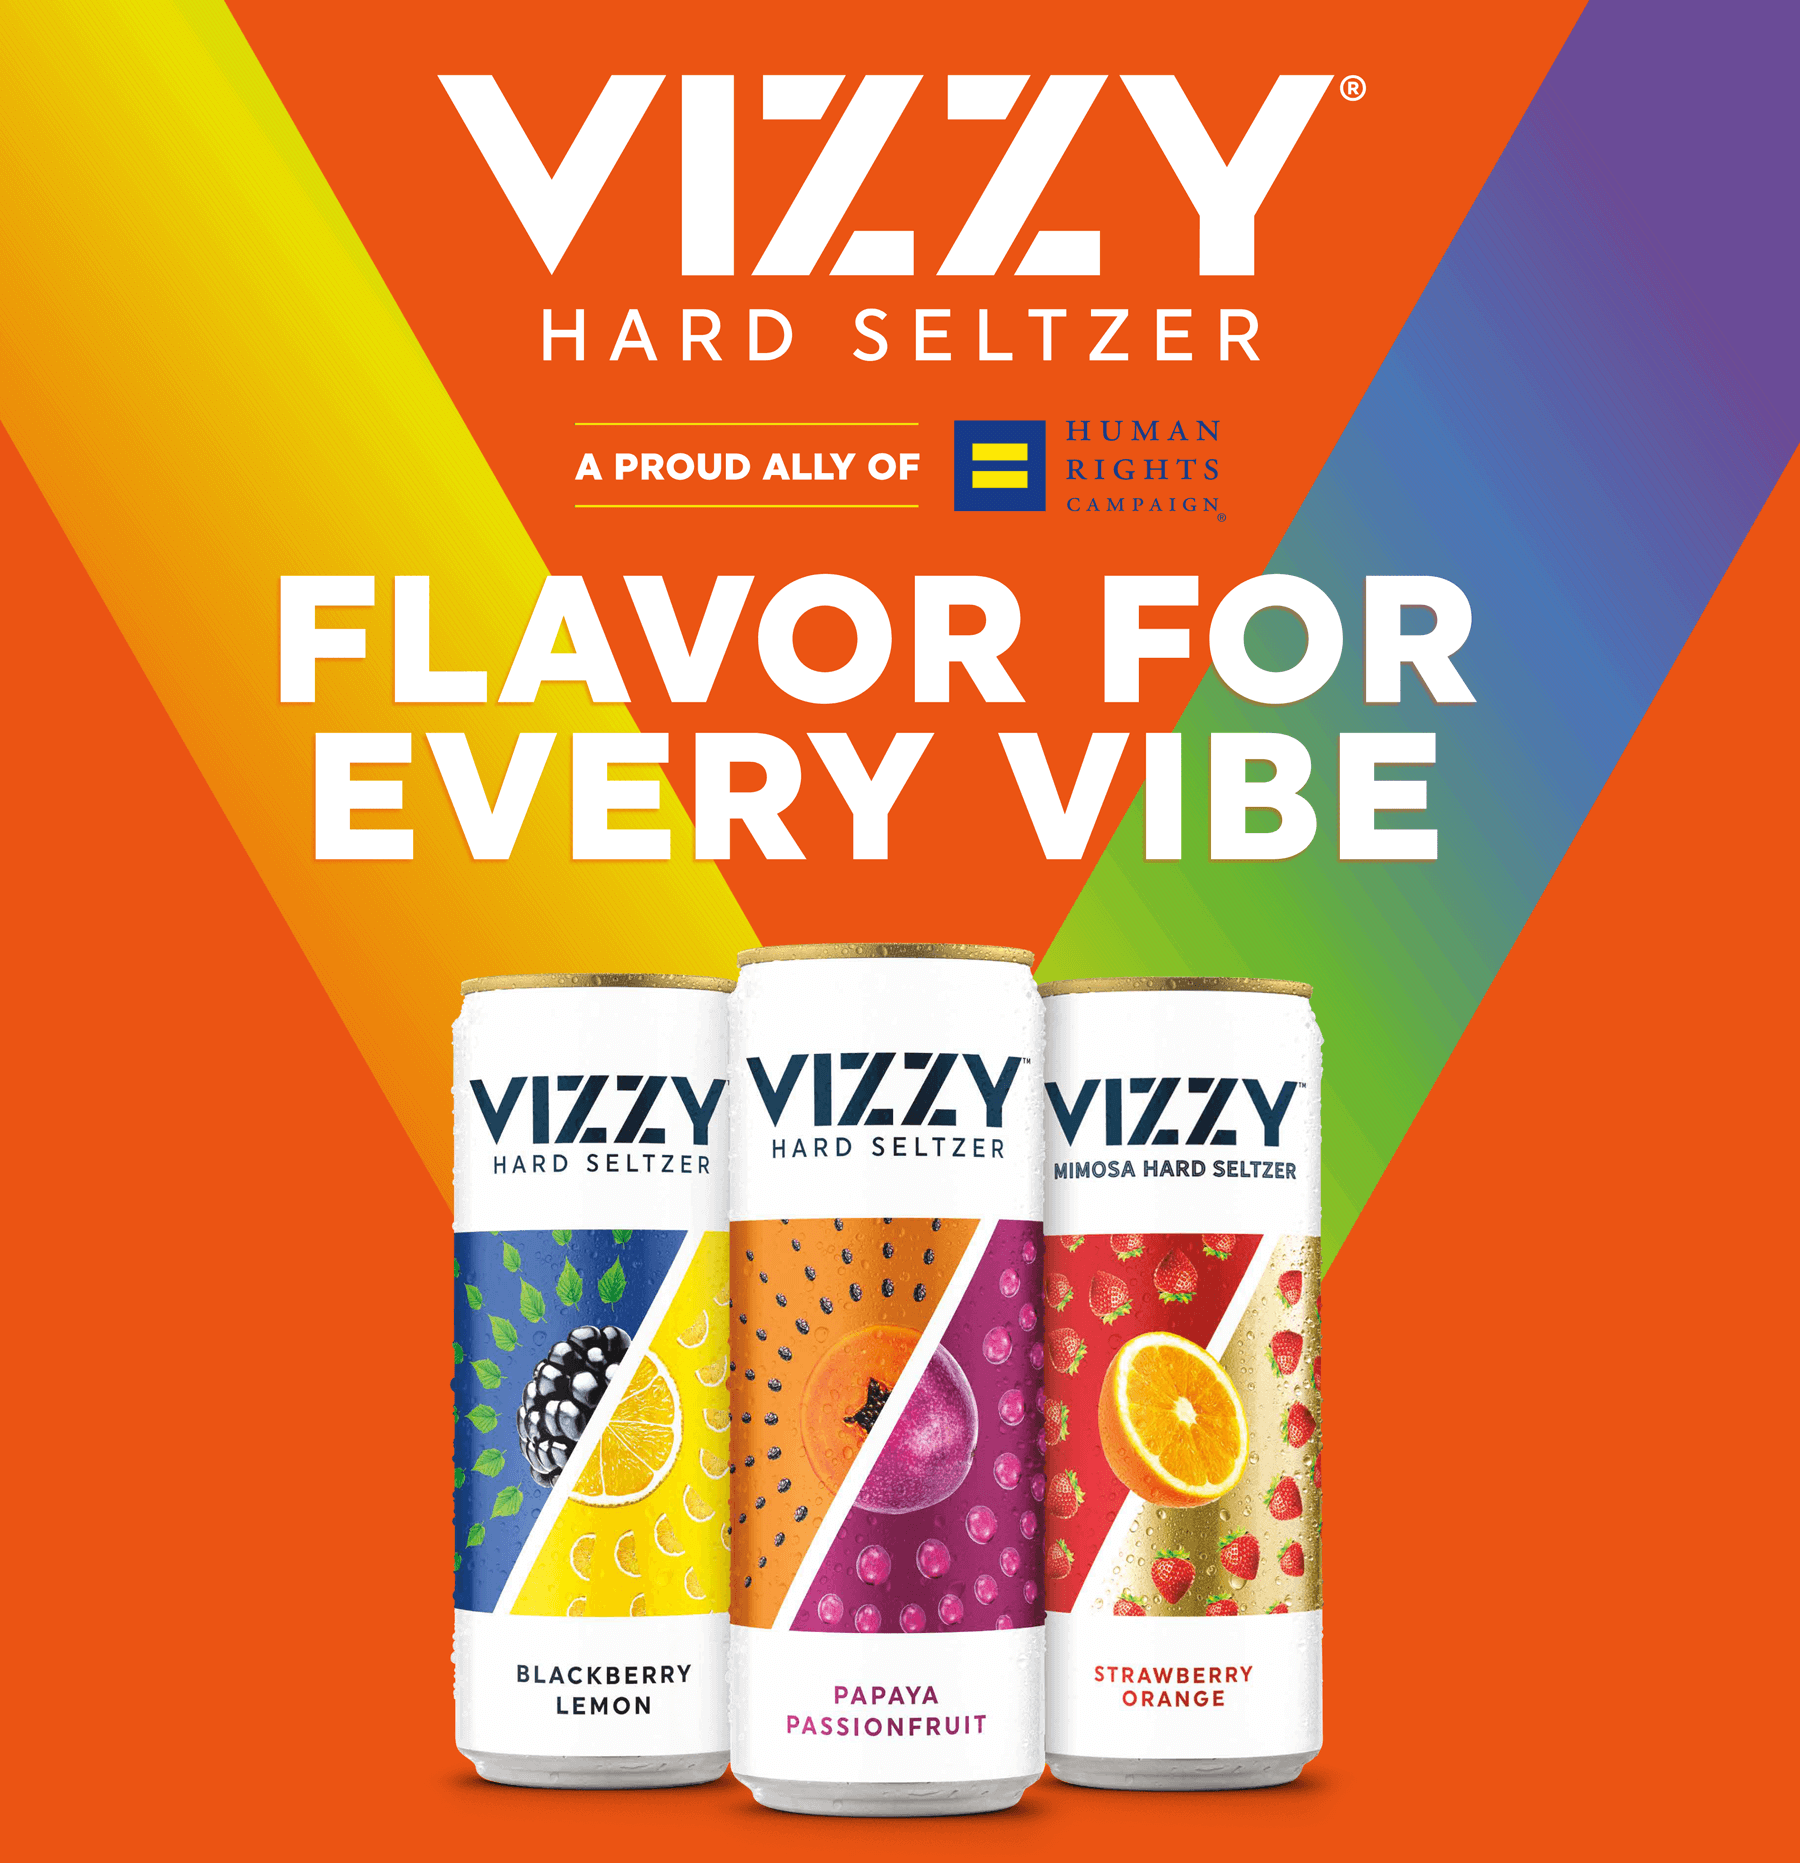 Vizzy - Flavor for every vibe